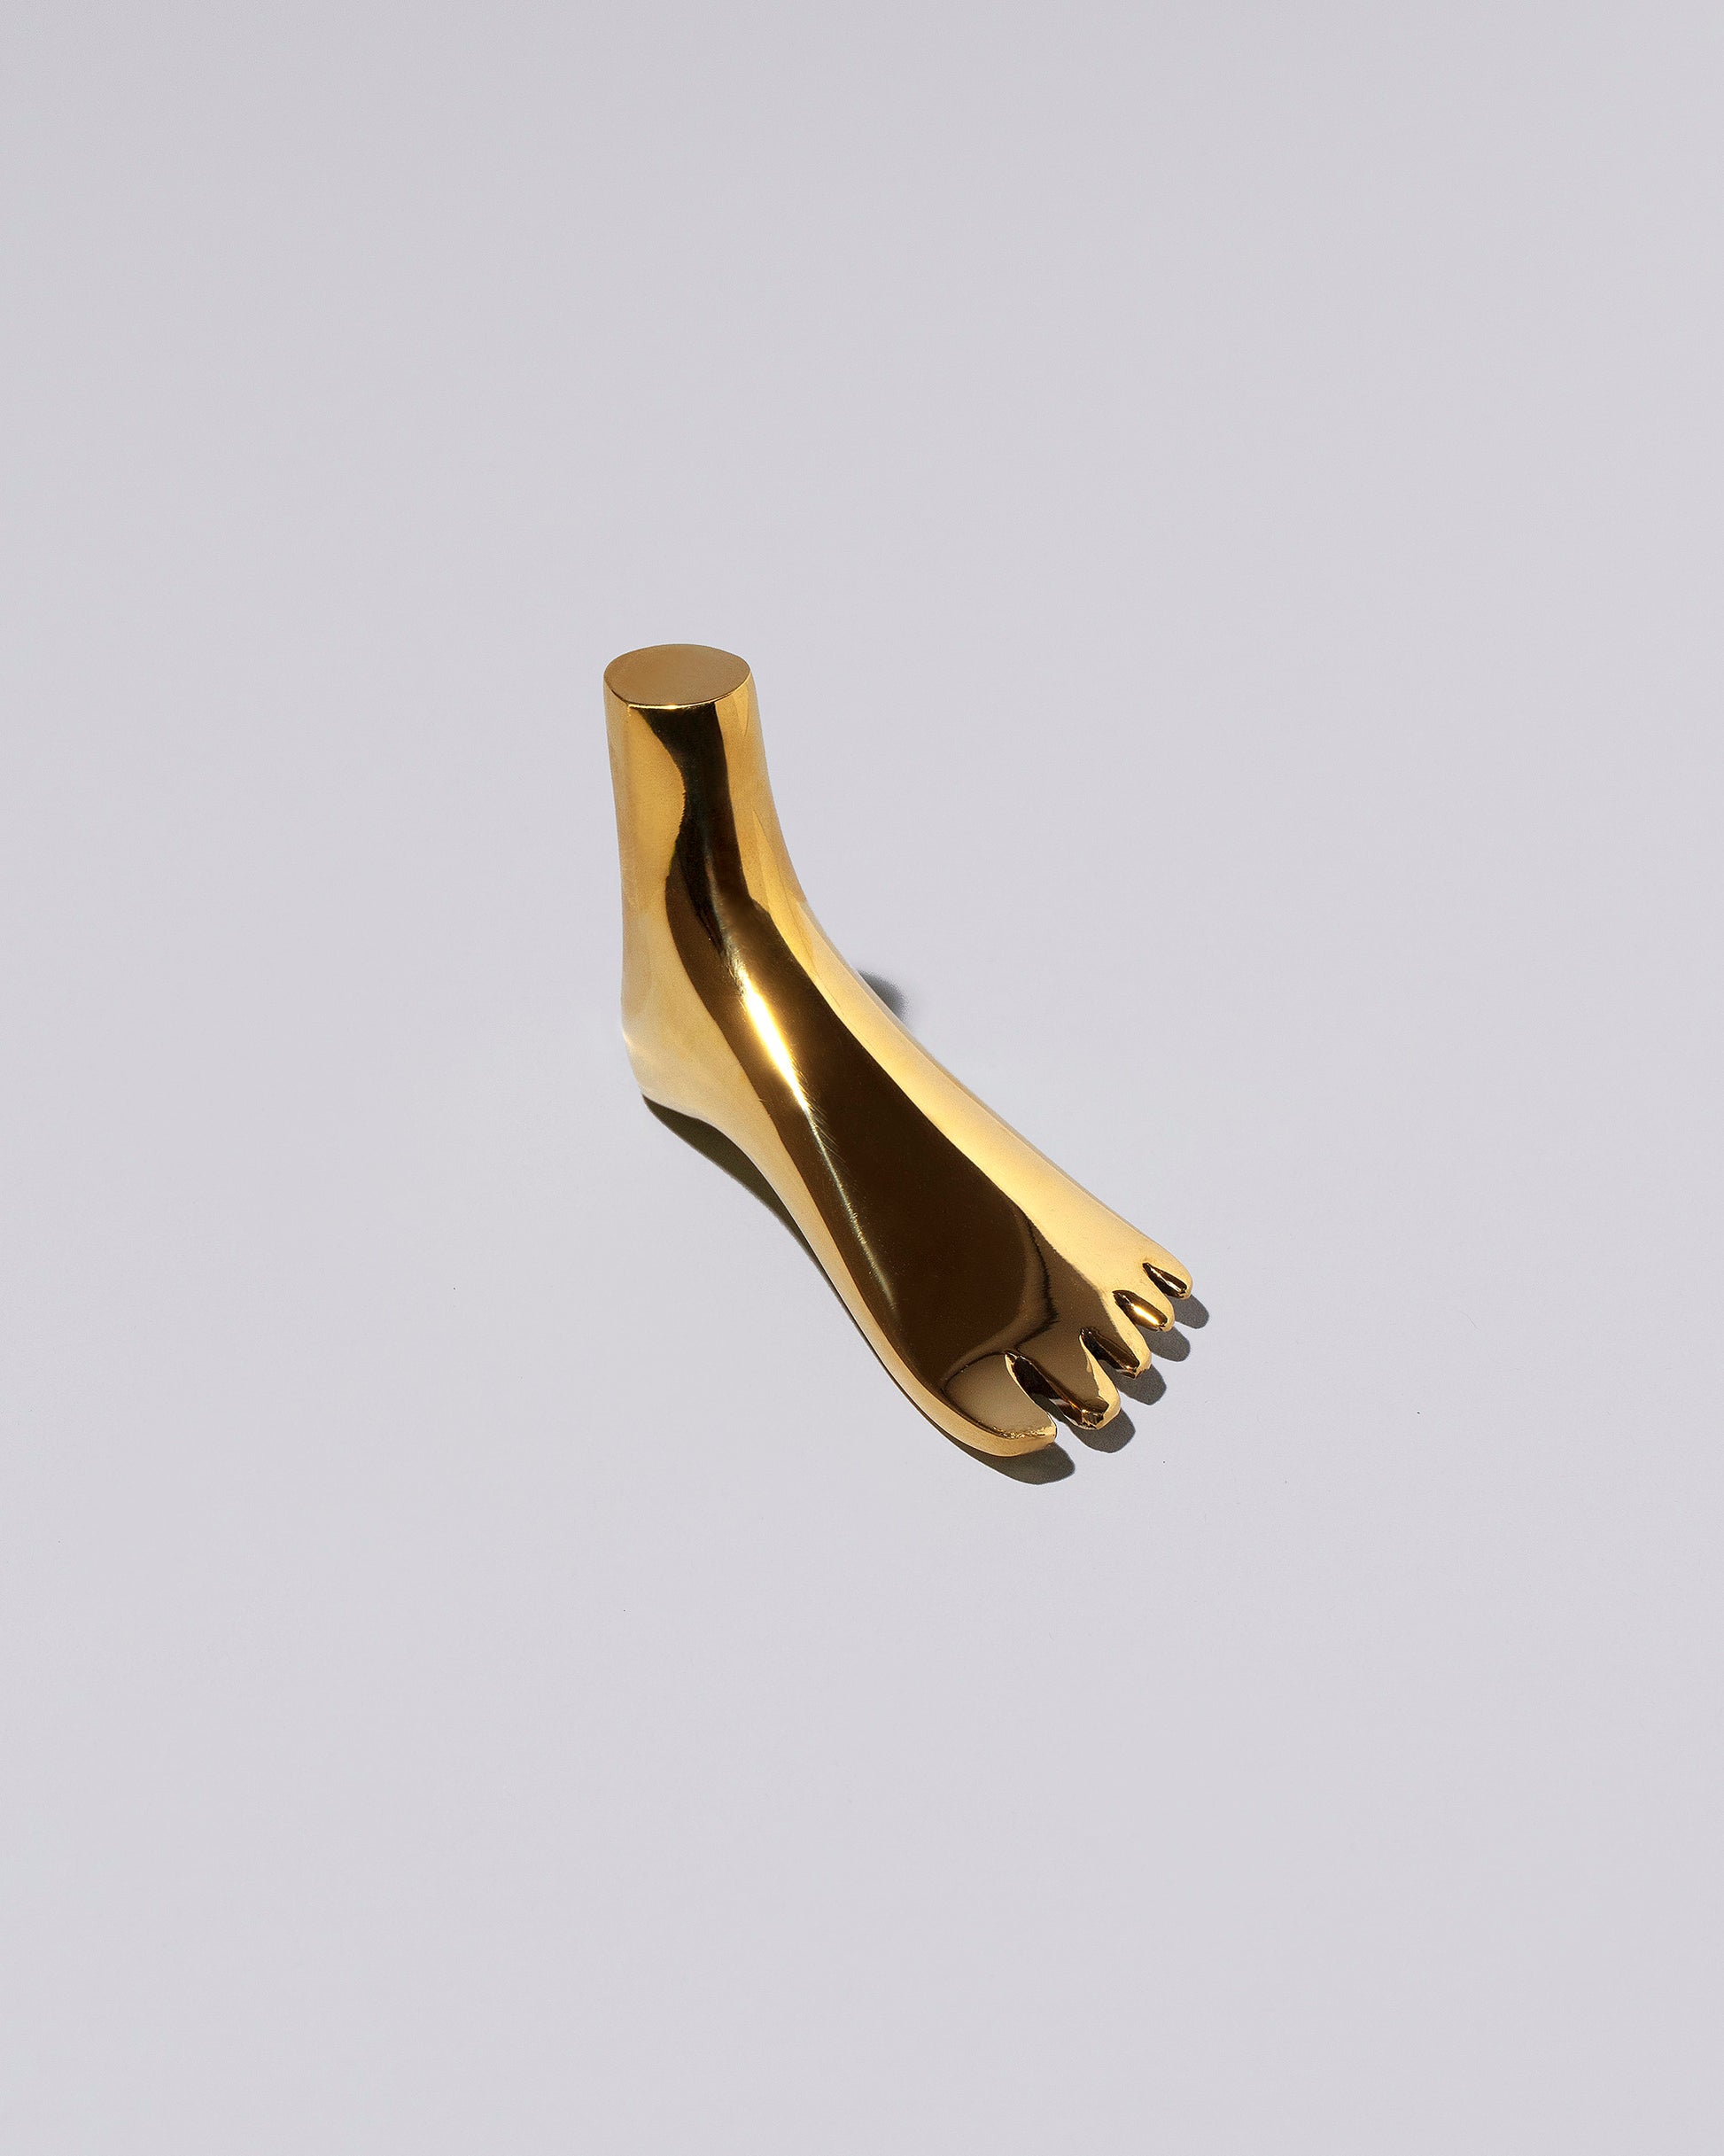 View from the side of the Carl Auböck Brass Foot Paperweight on light color background.